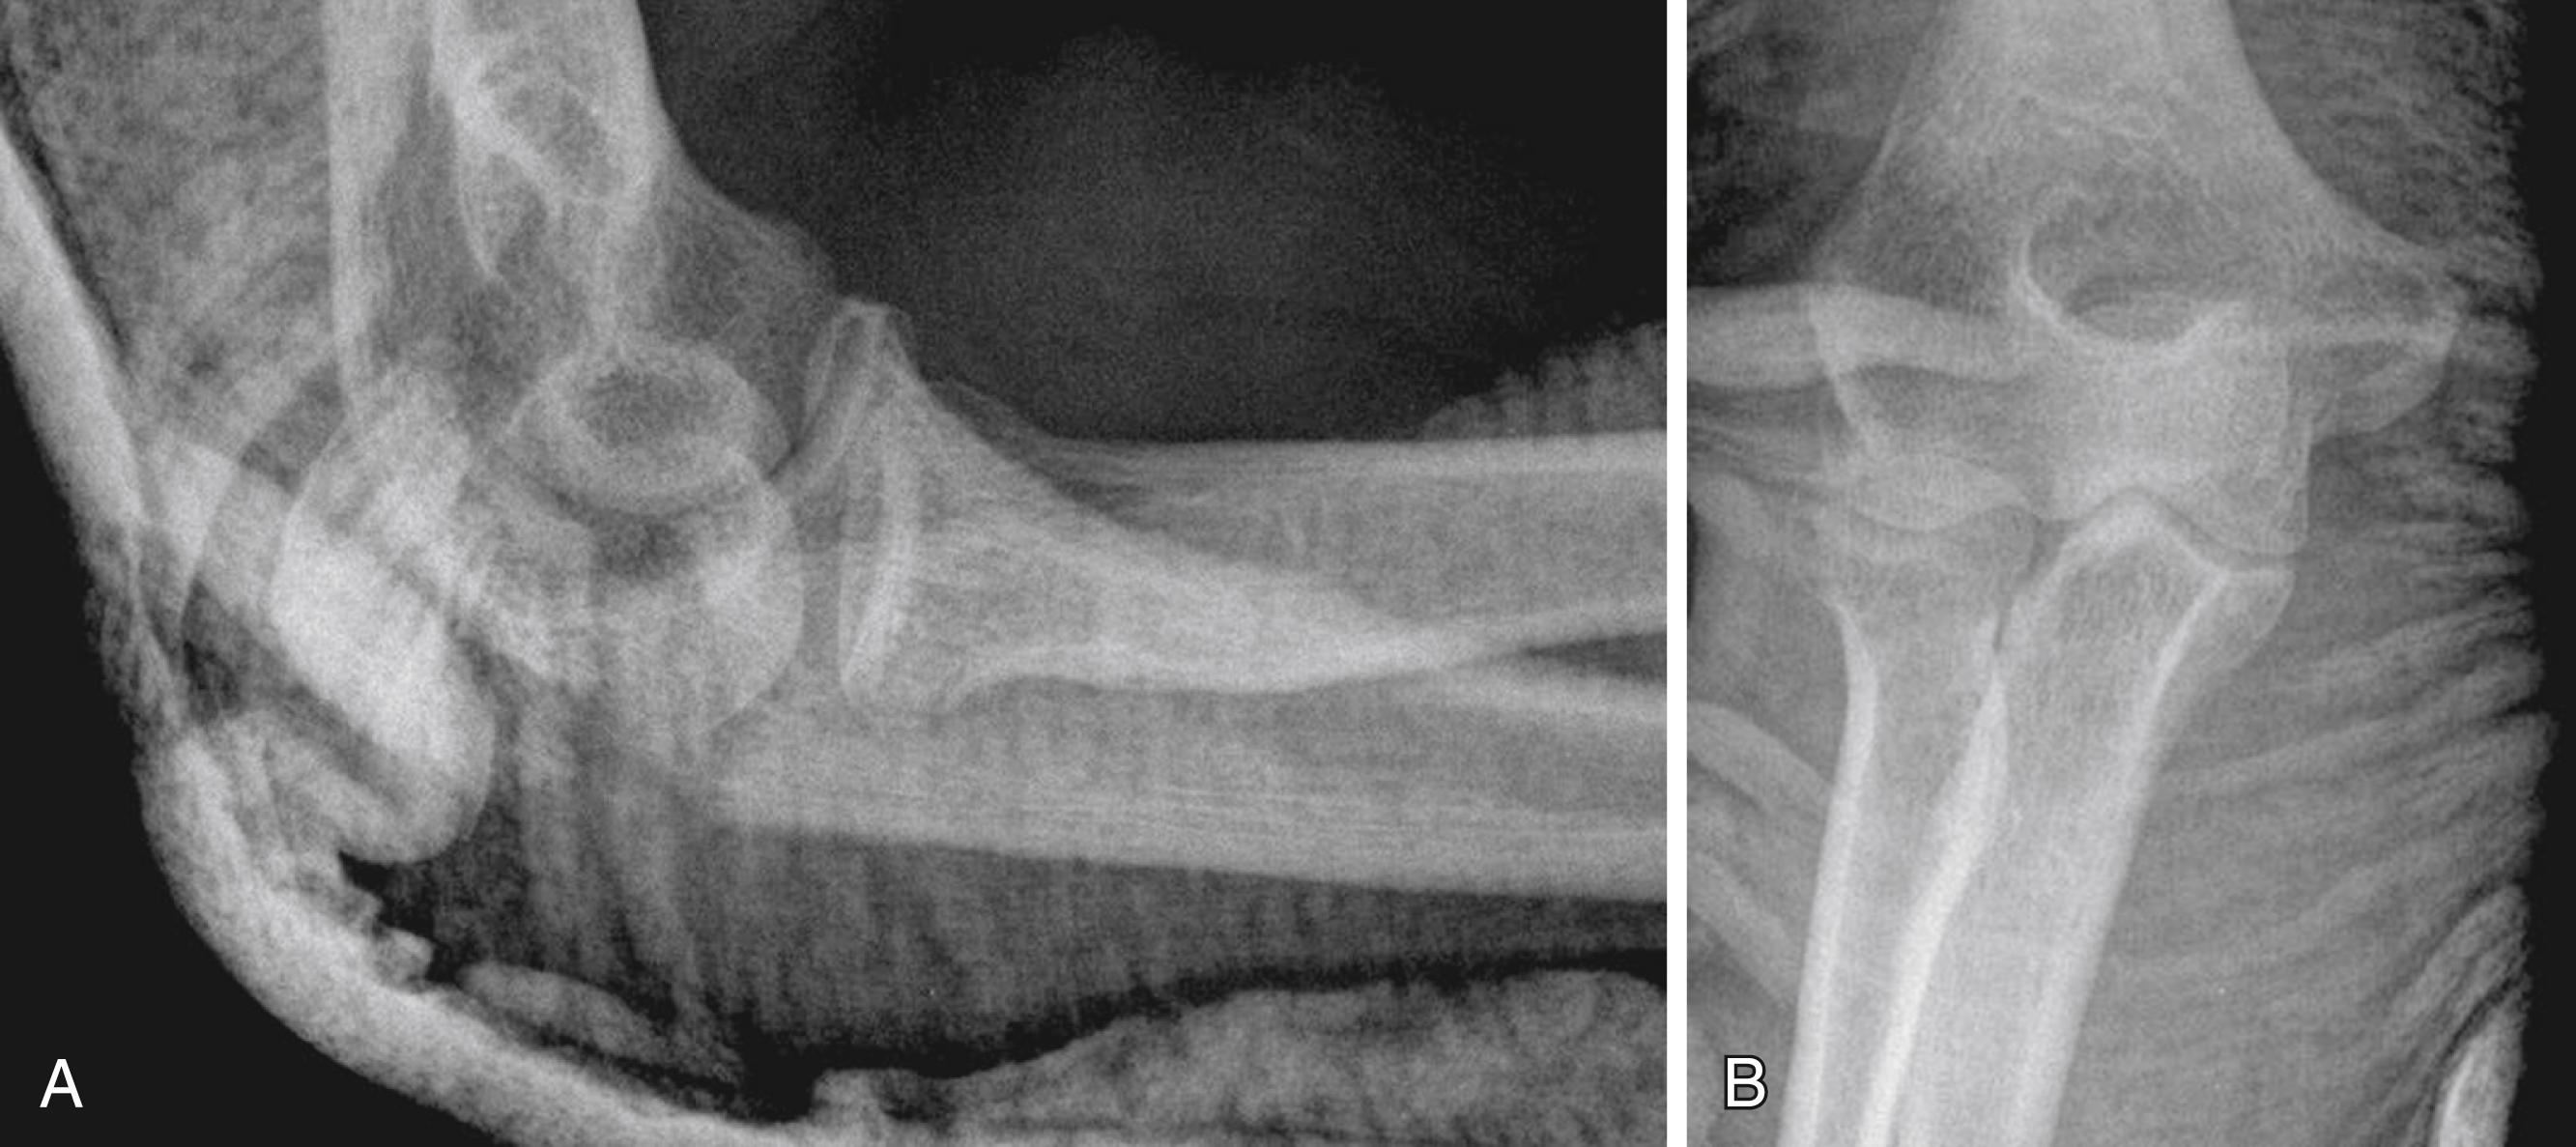 eFig. 20.20, A and B, A simple fracture of the olecranon after splinting.